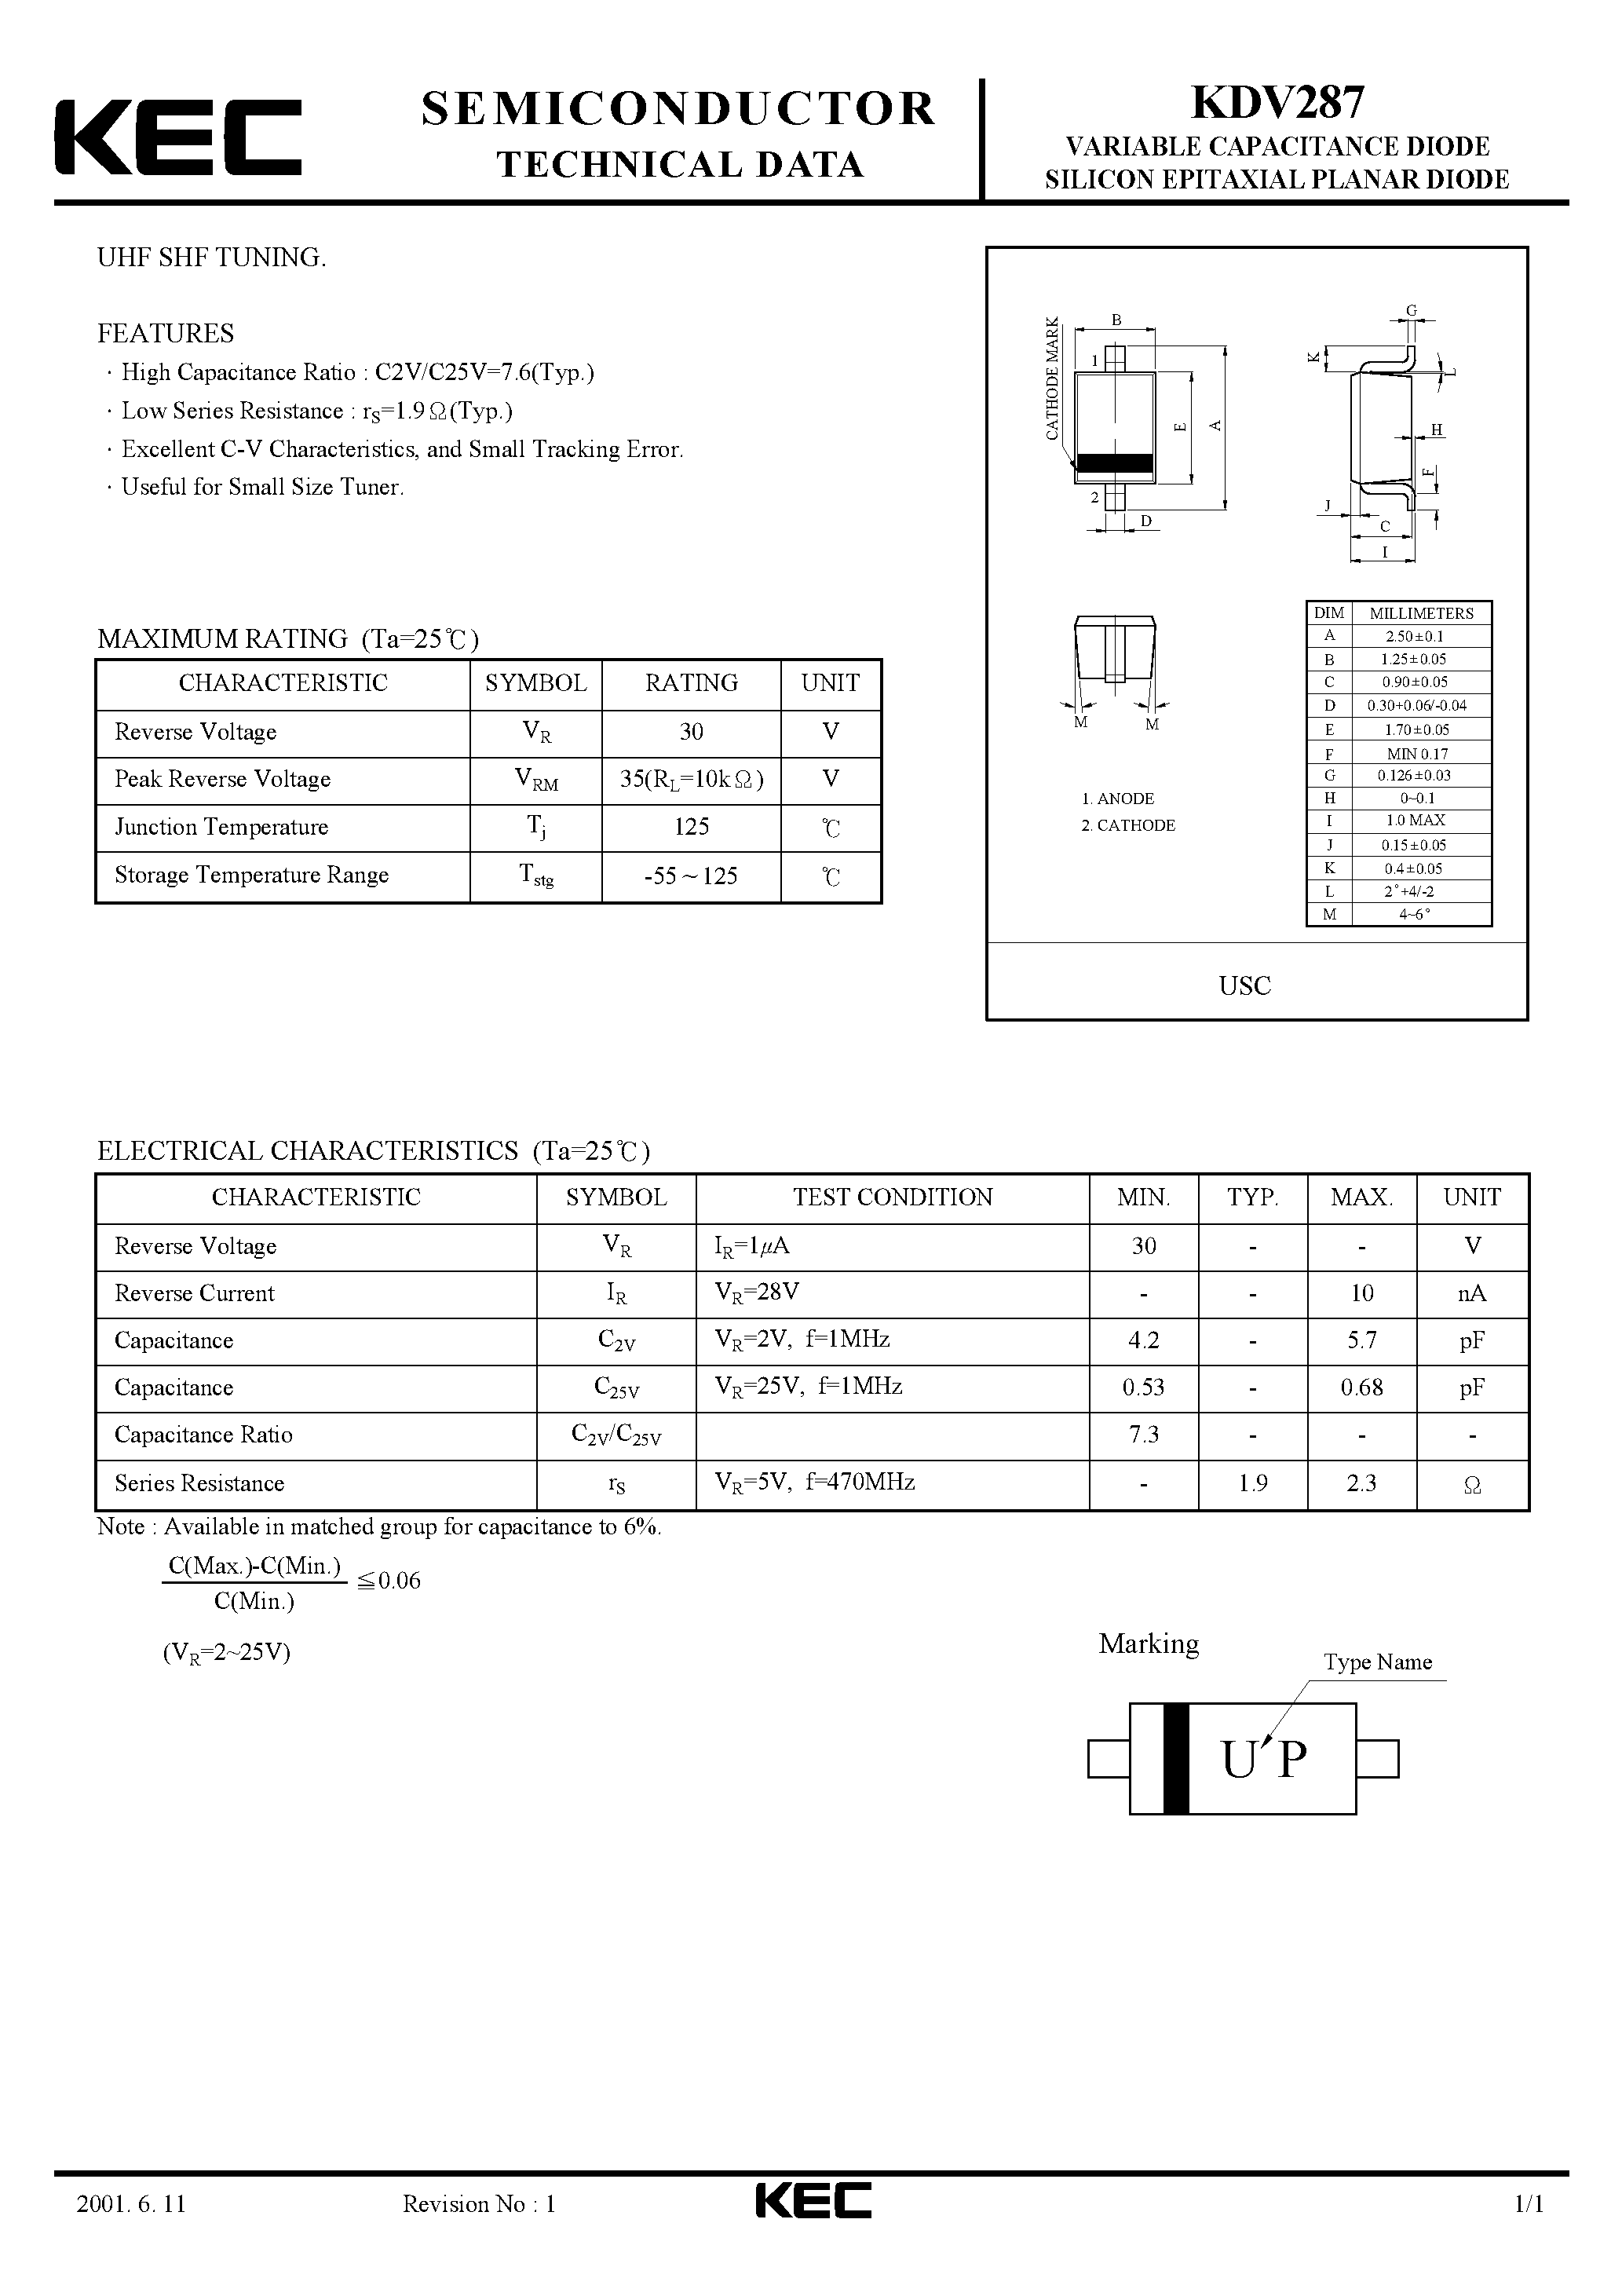 Datasheet KDV287 - VARIABLE CAPACITANCE DIODE SILICON EPITAXIAL PLANAR DIODE(UHF SHF TUNING) page 1